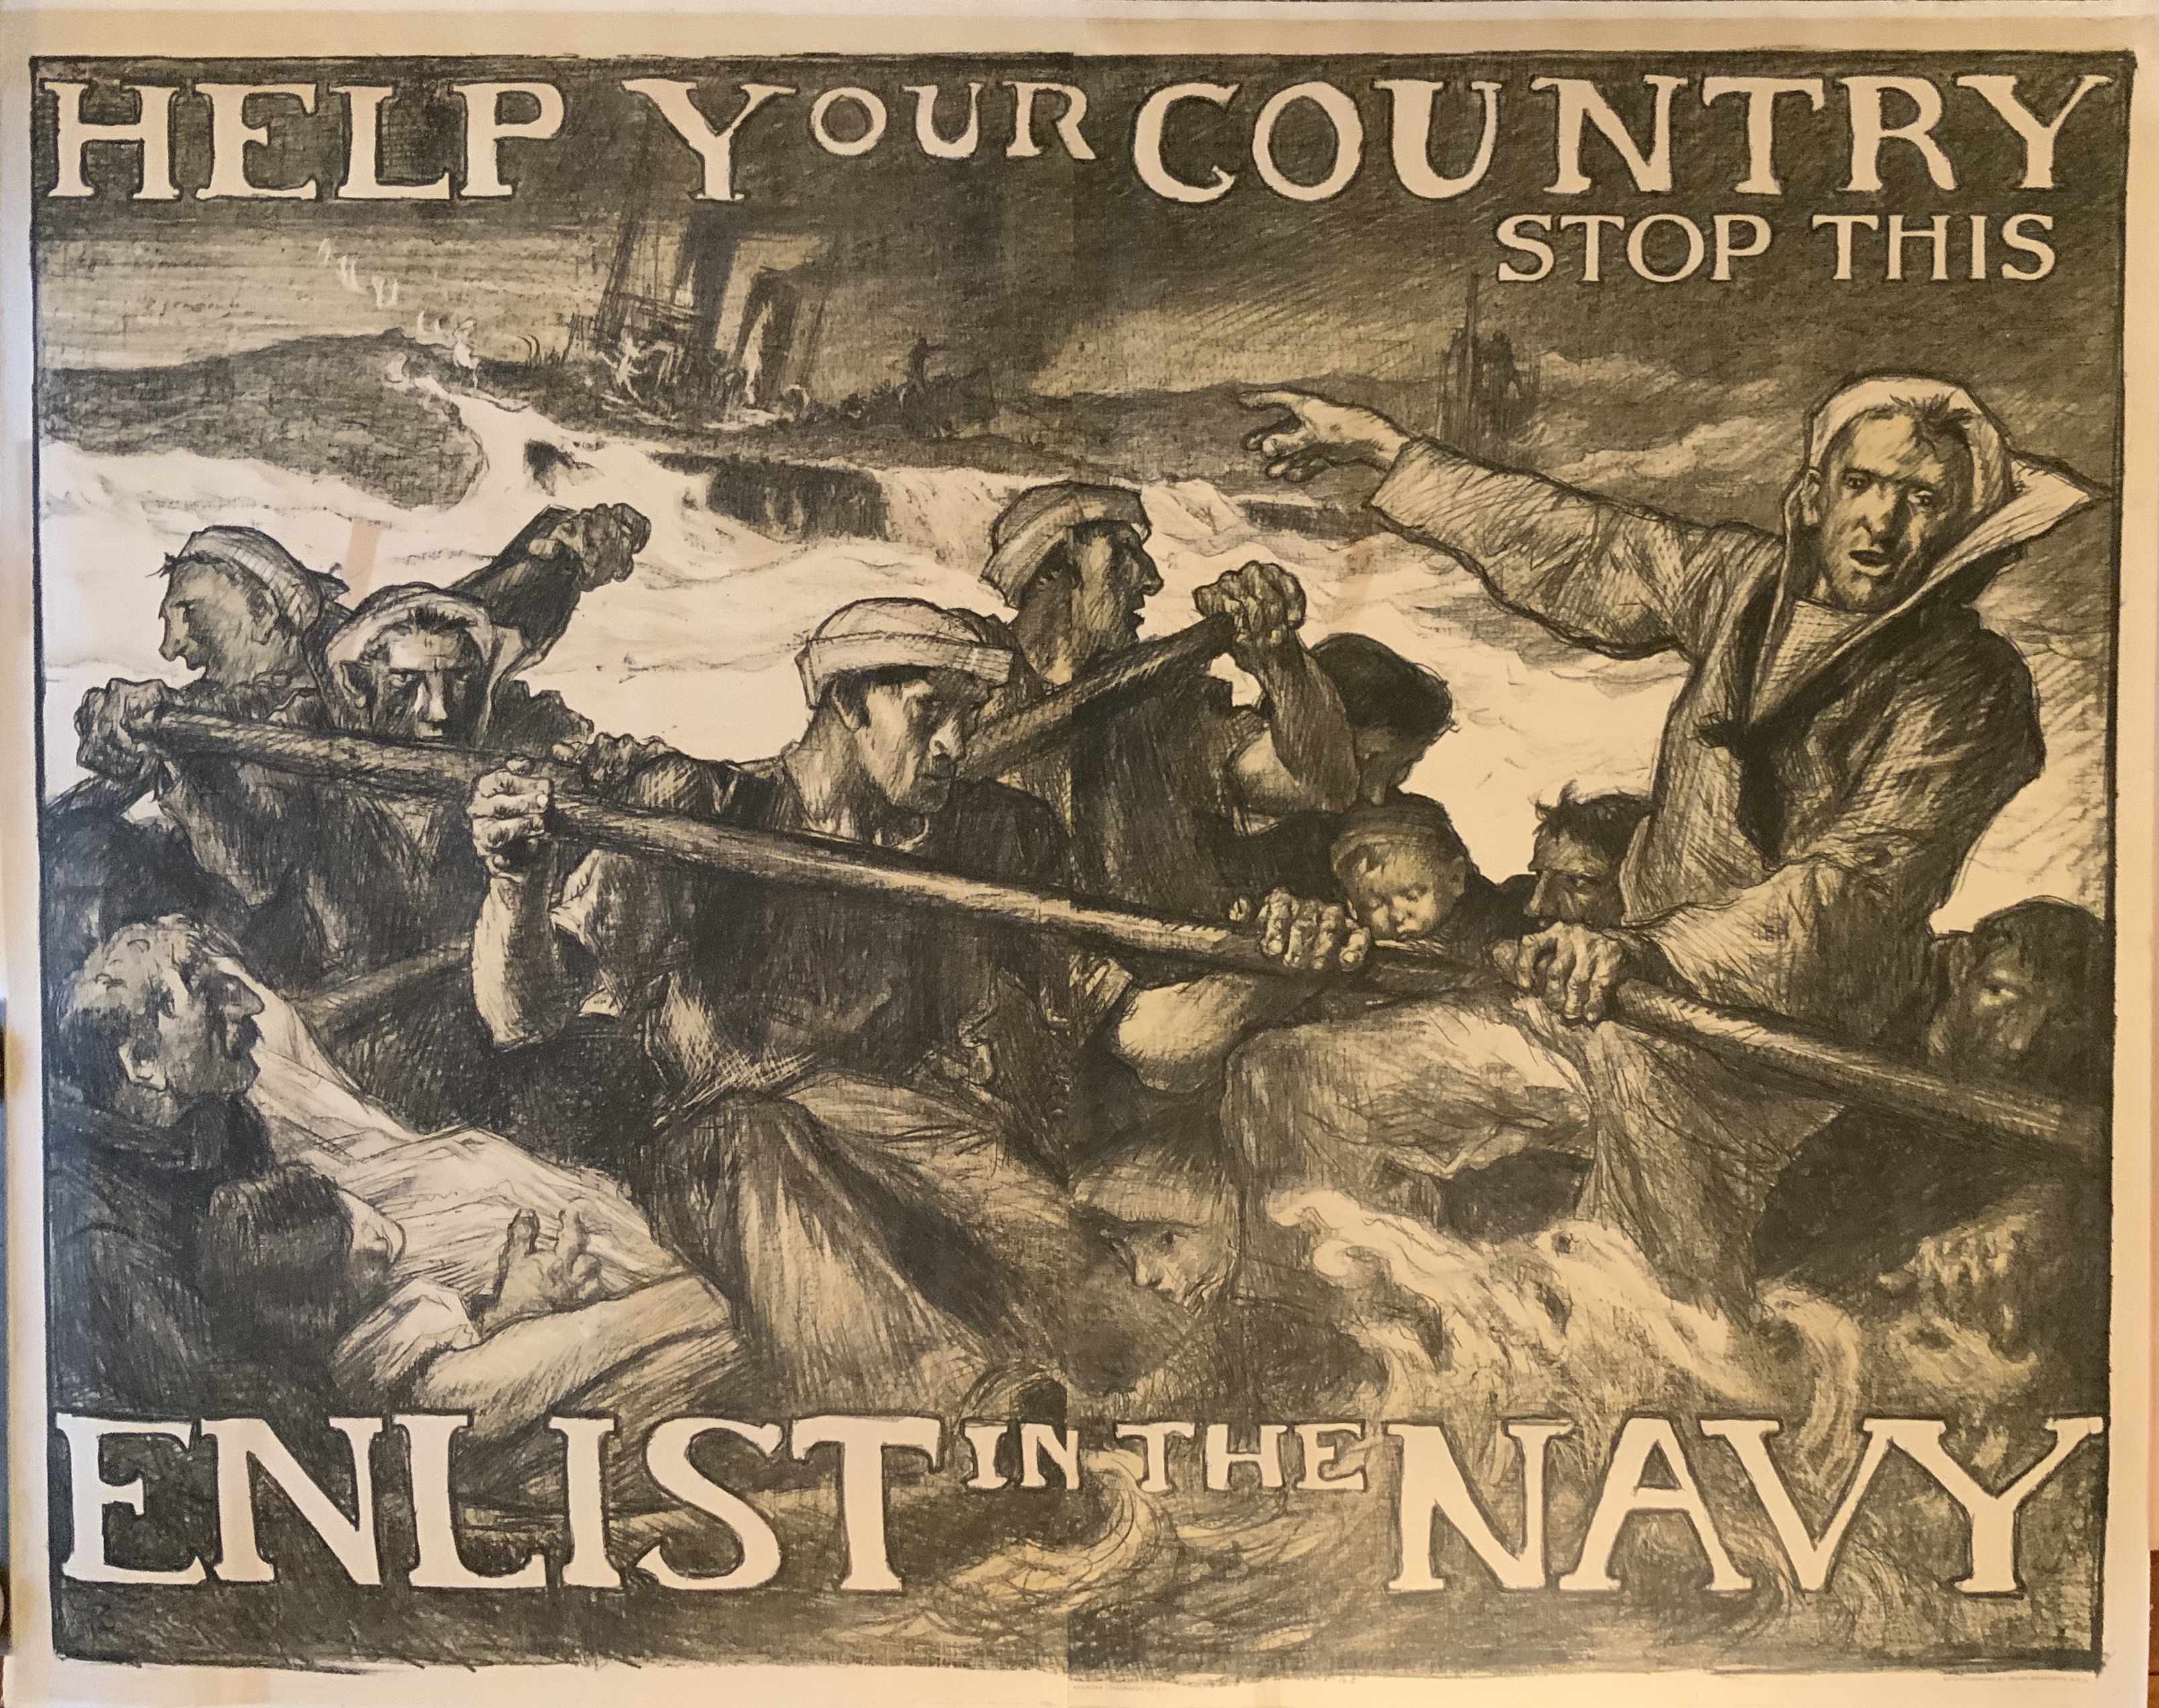 J919	HELP YOUR COUNTRY STOP THIS - ENLIST IN THE NAVY